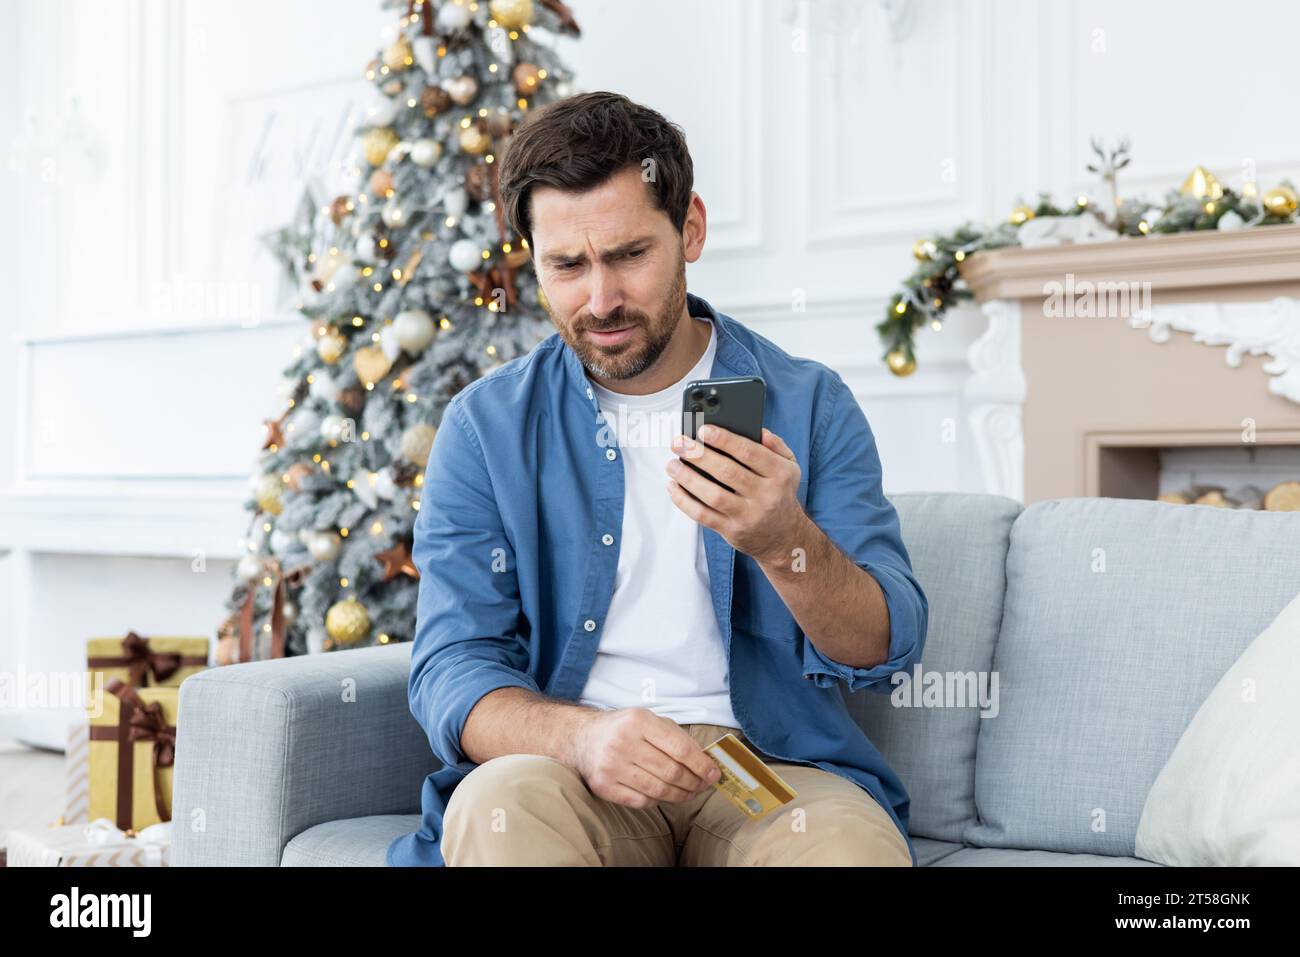 Credit score problems. A mature man is sitting at home on the sofa on Christmas holidays and holding a credit card in his hands, looking at the phone screen incredulously and worriedly. Stock Photo